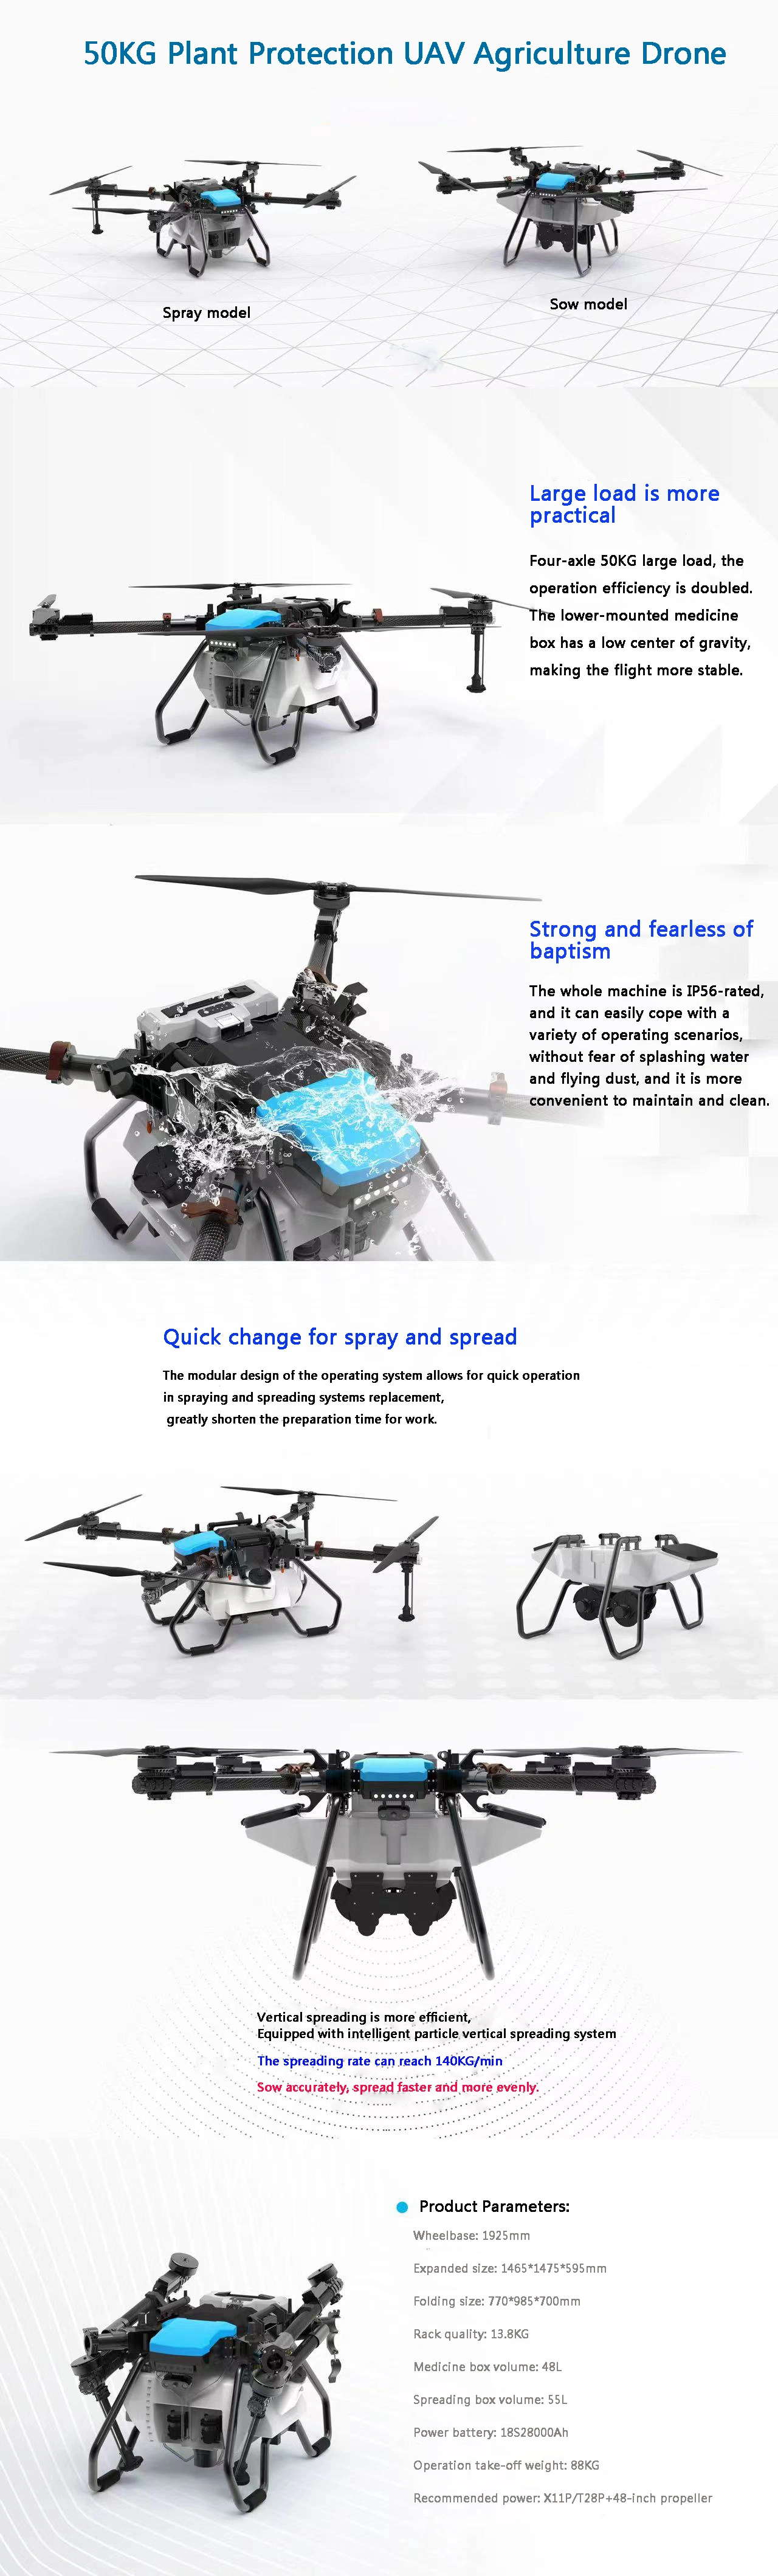 50kg agriculture drone specifications and price